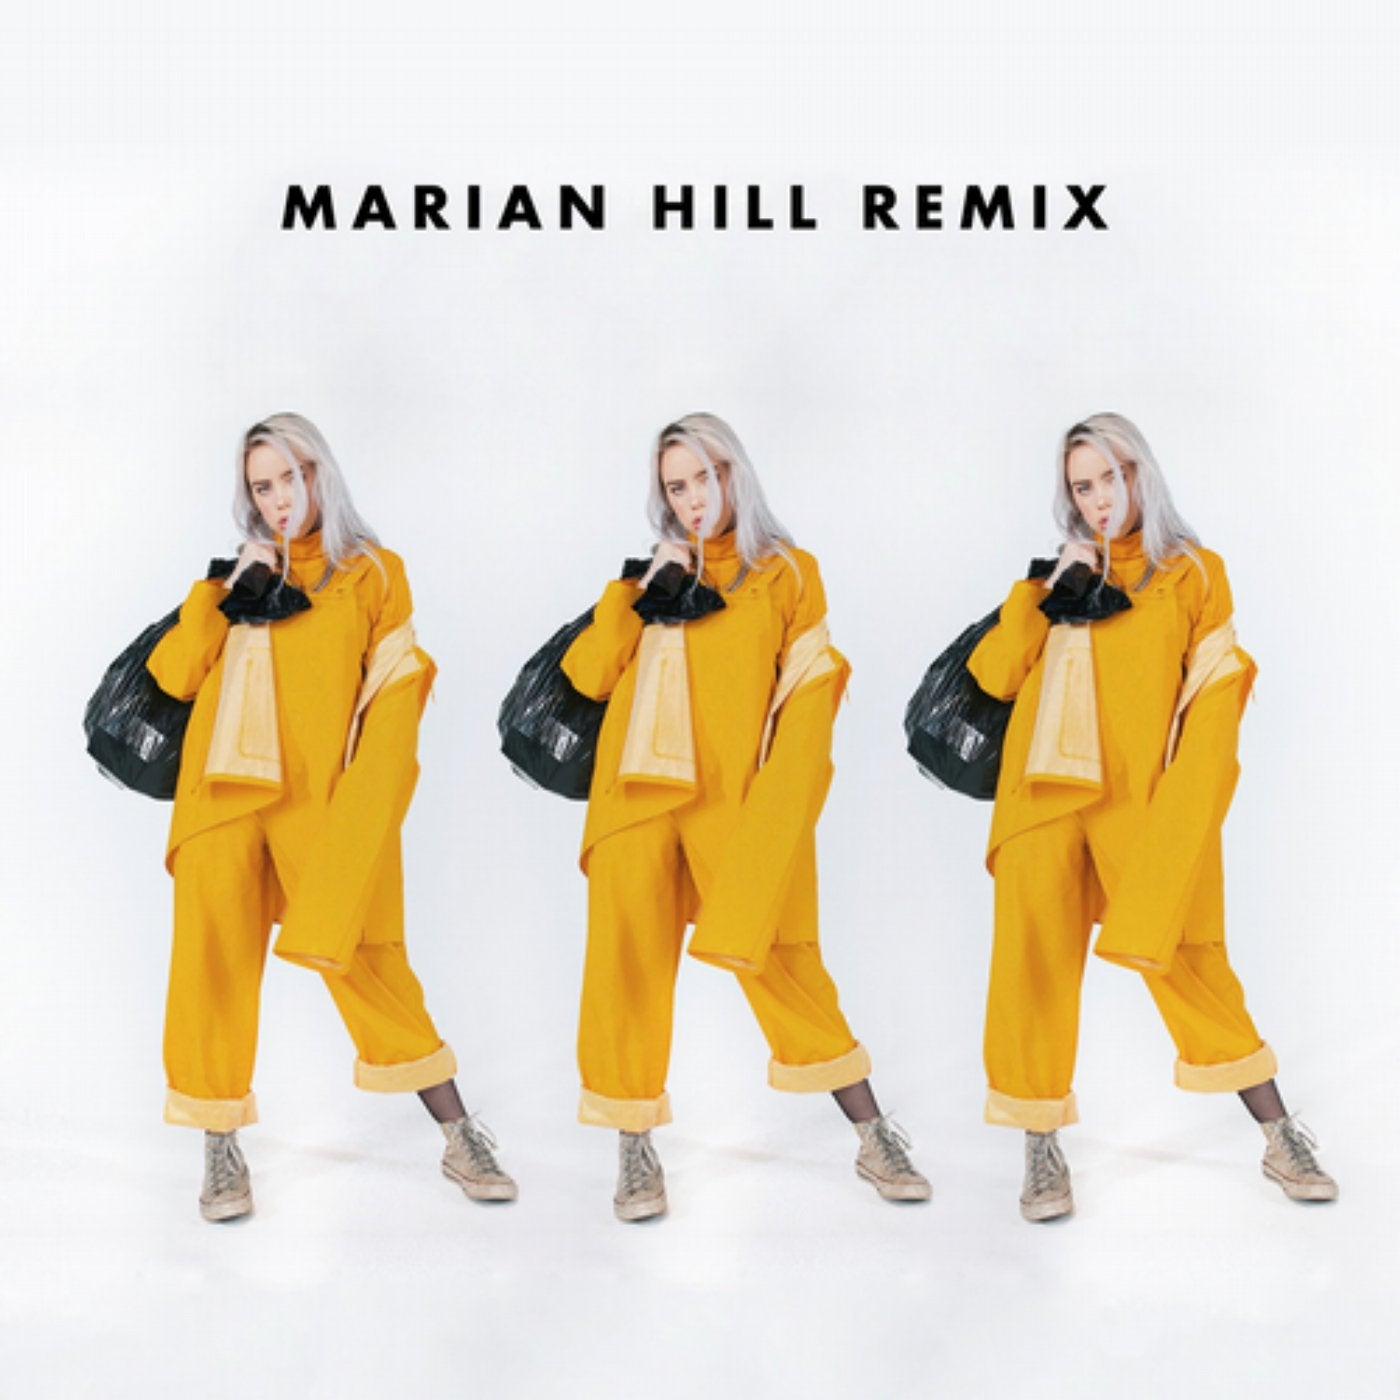 down by marian hill drum beat